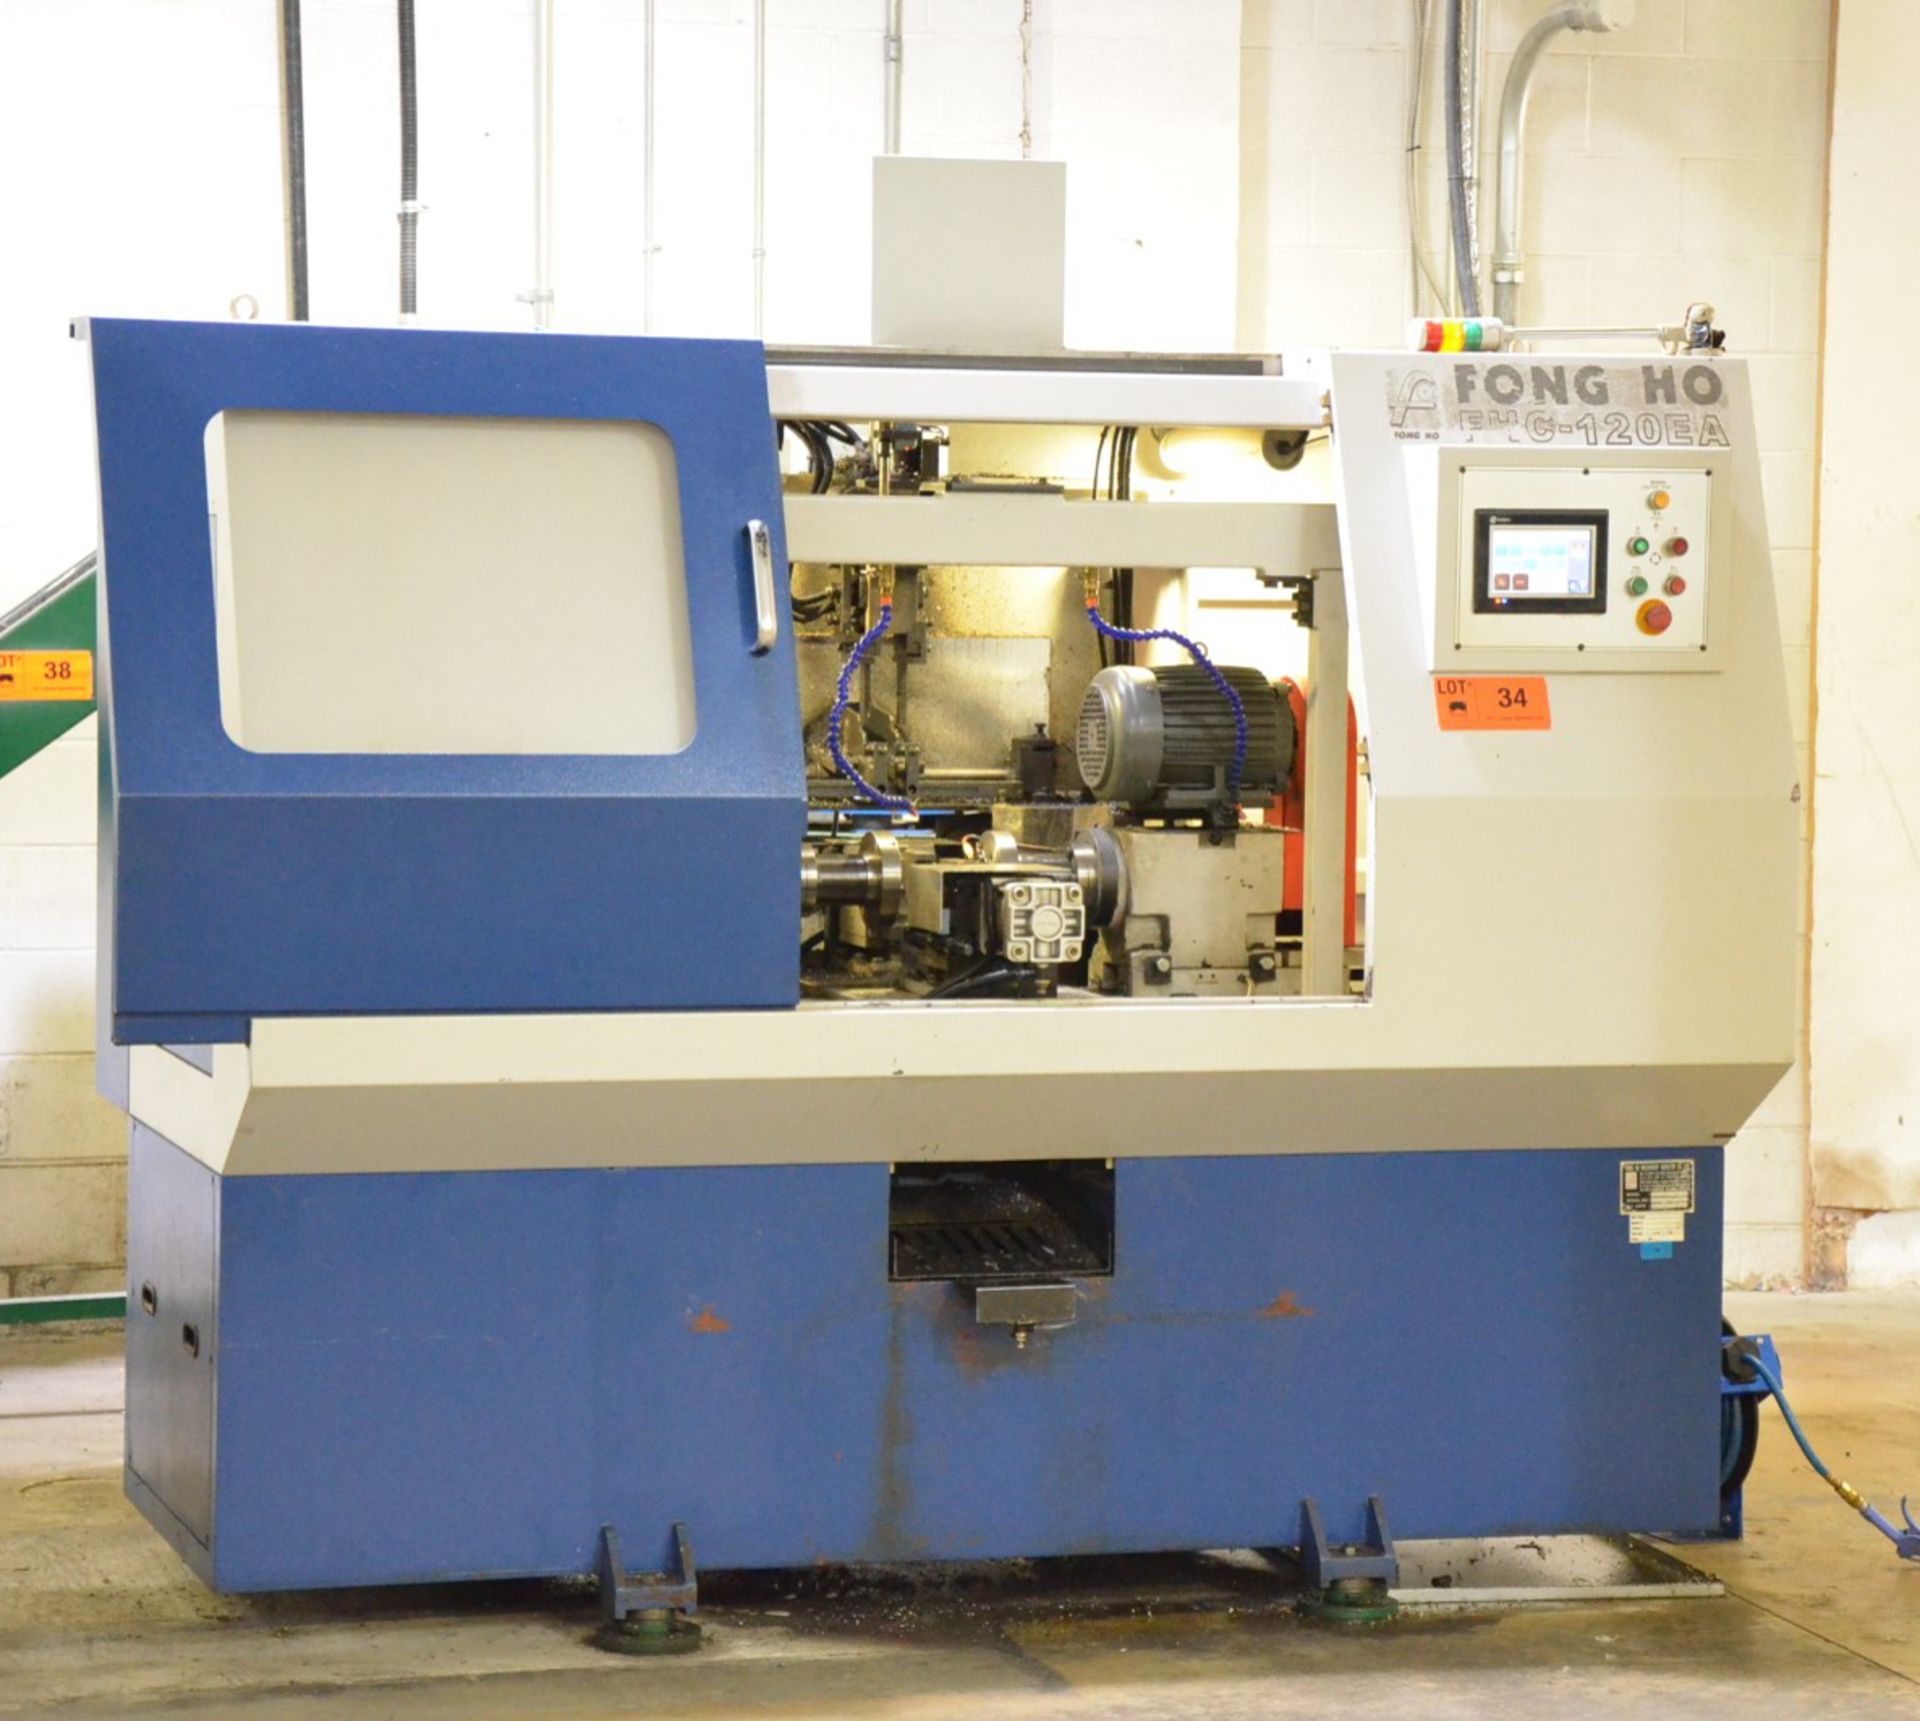 FH MACHINERY (2013) FHC-120EA CNC AUTOMATIC OPPOSING SPINDLE CHAMFERING MACHINE WITH SHIHLIN EA-12 - Image 2 of 19